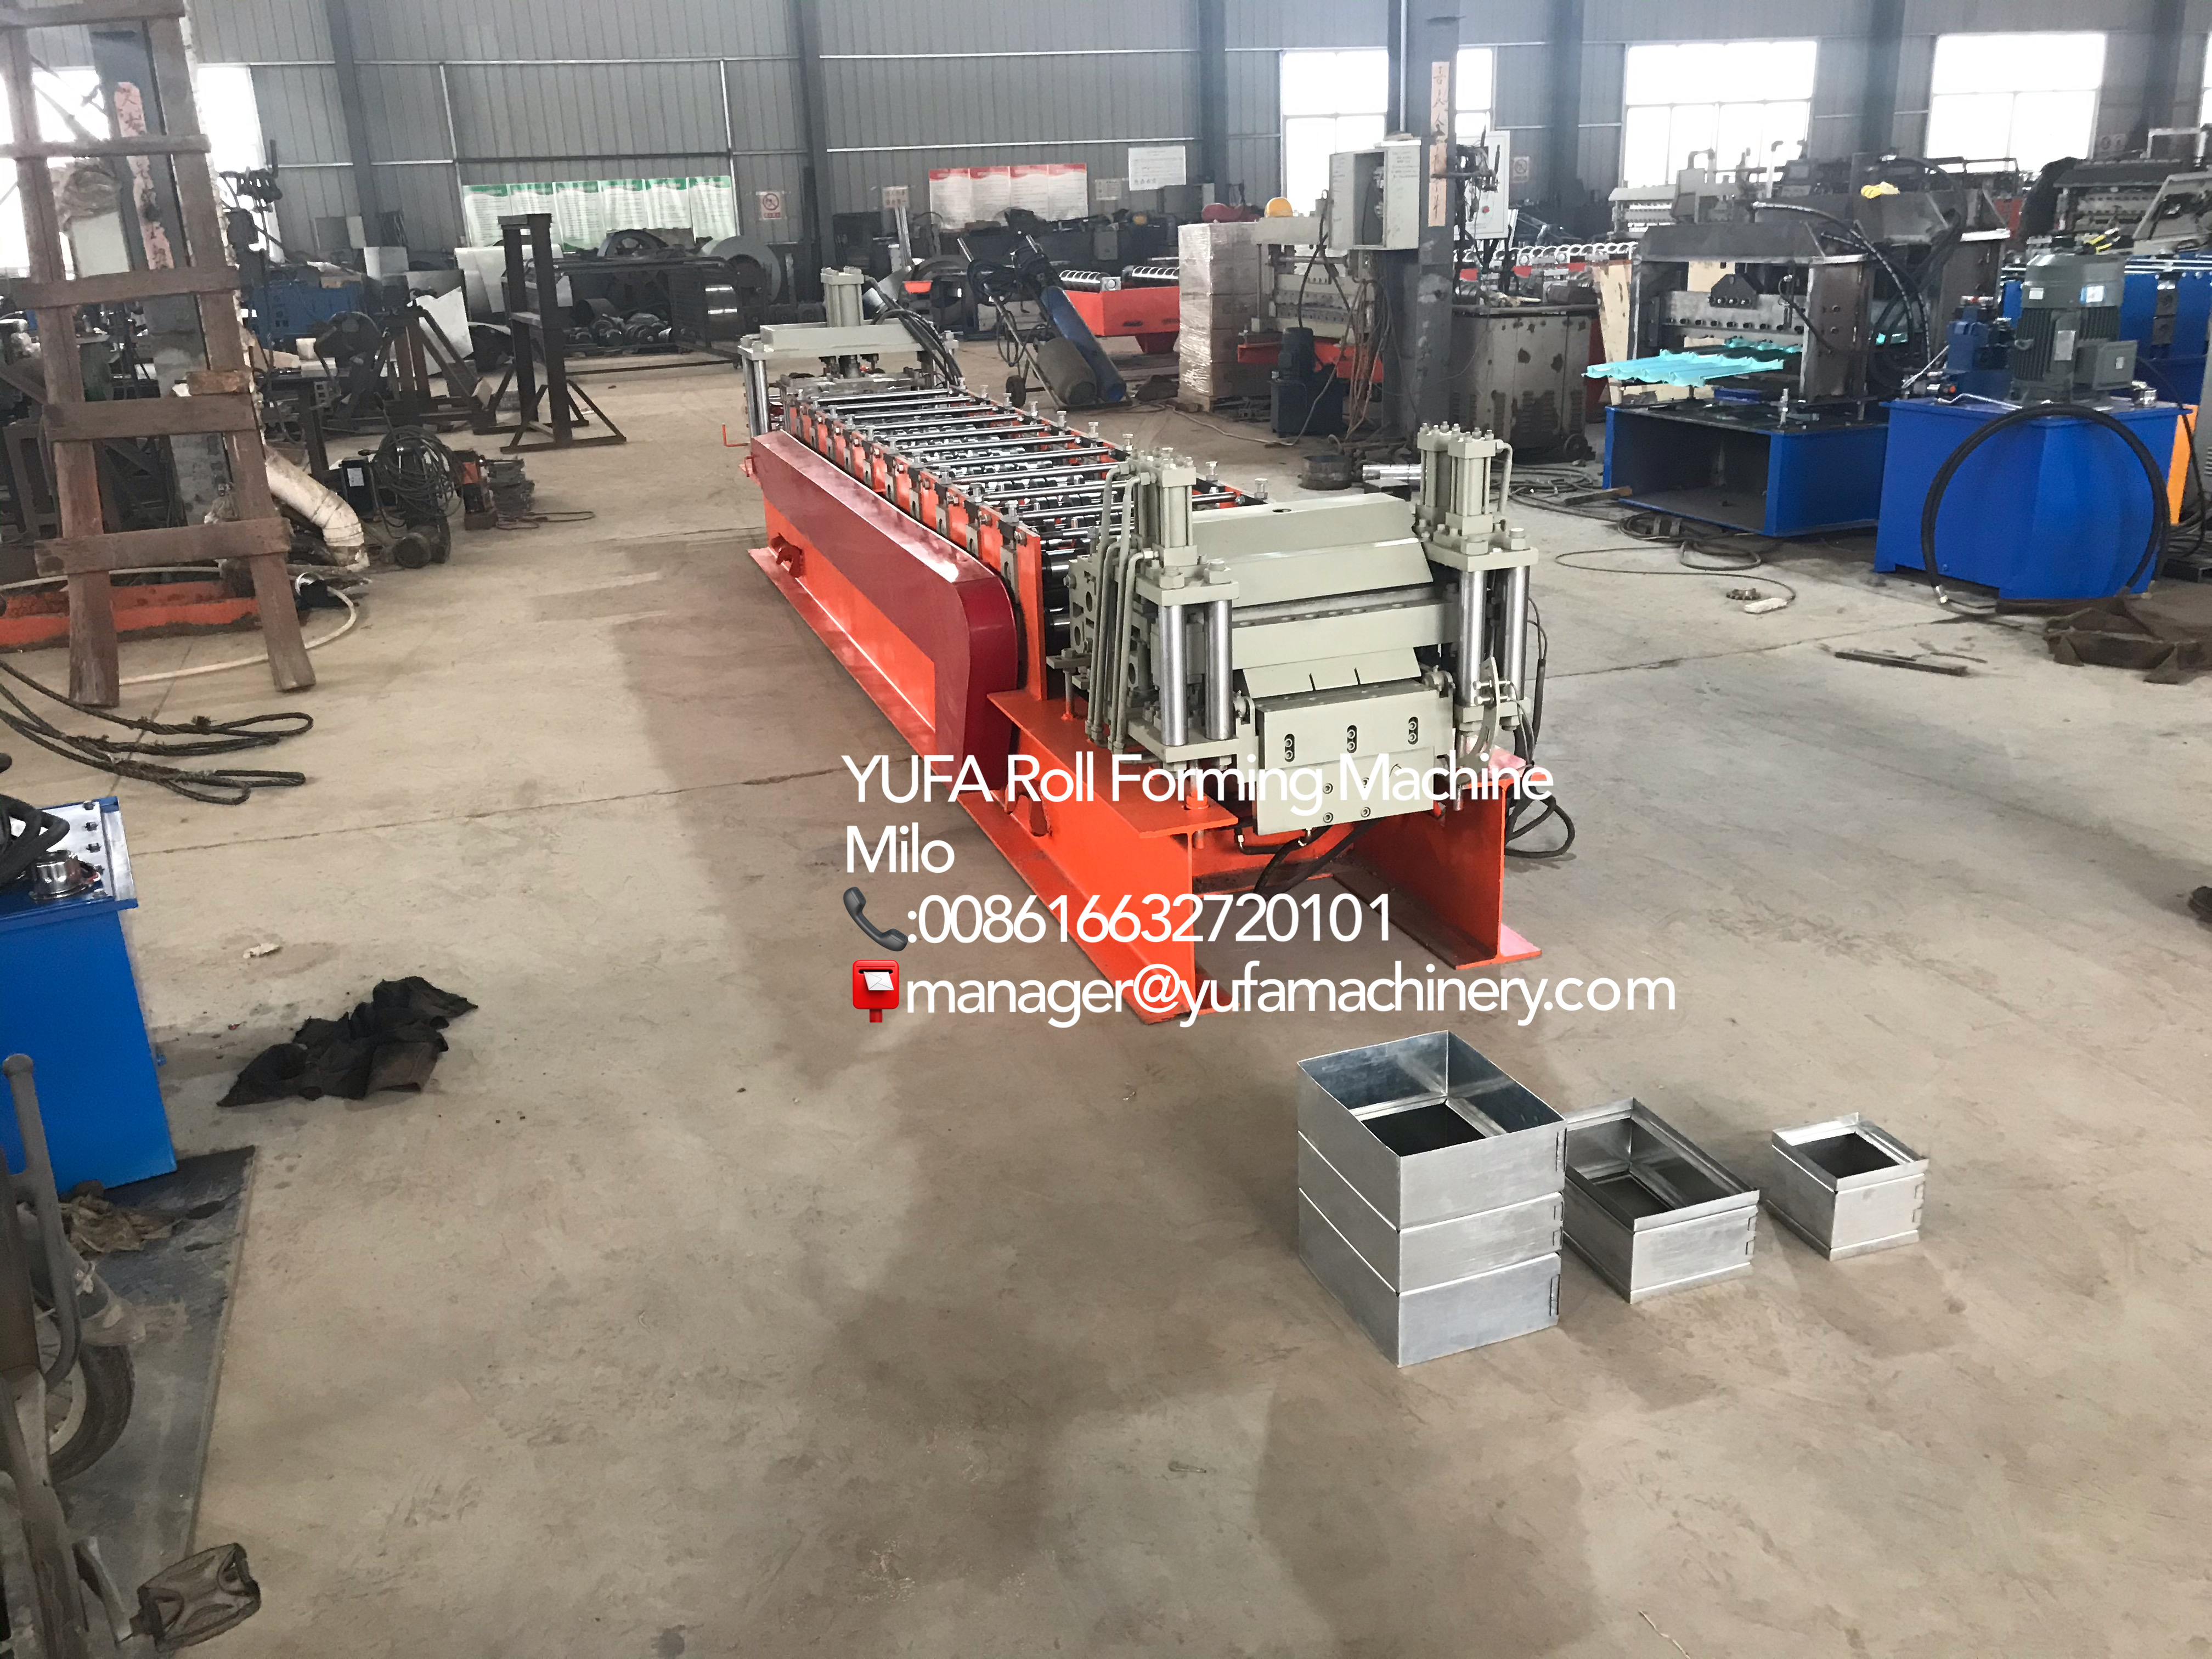 The fire damper frame roll forming machine shipping